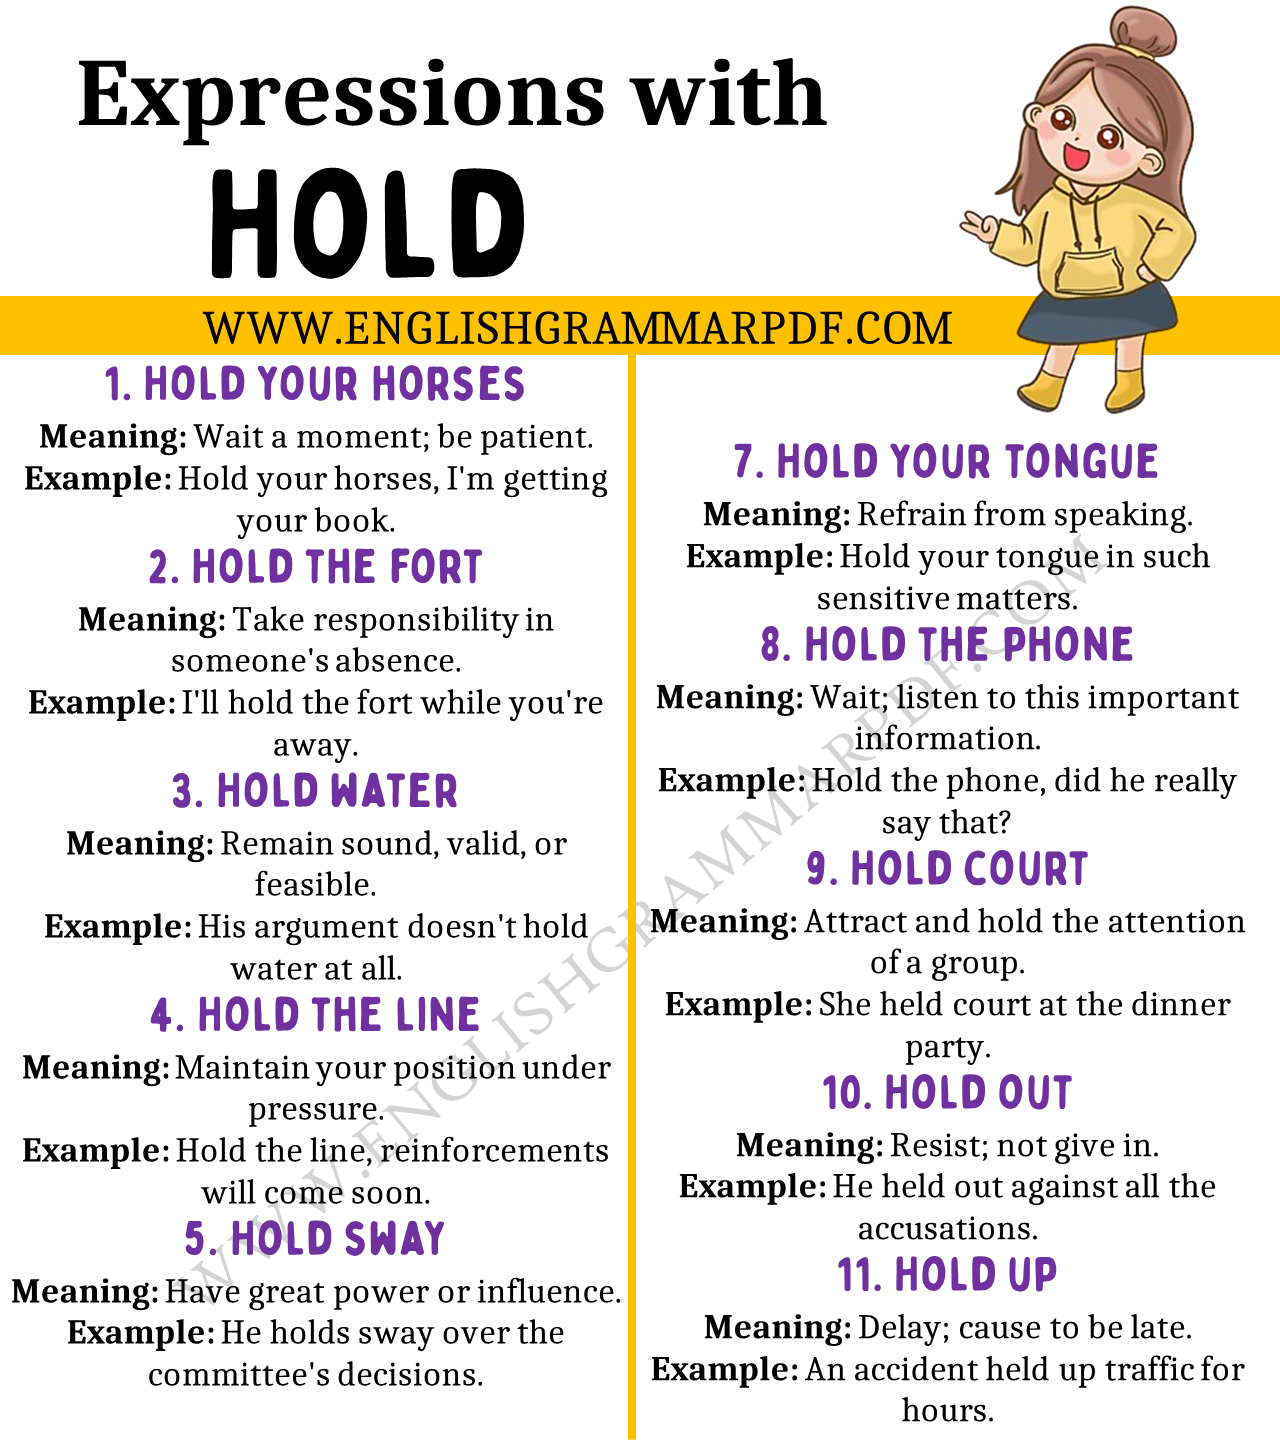 Expressions with “Hold”